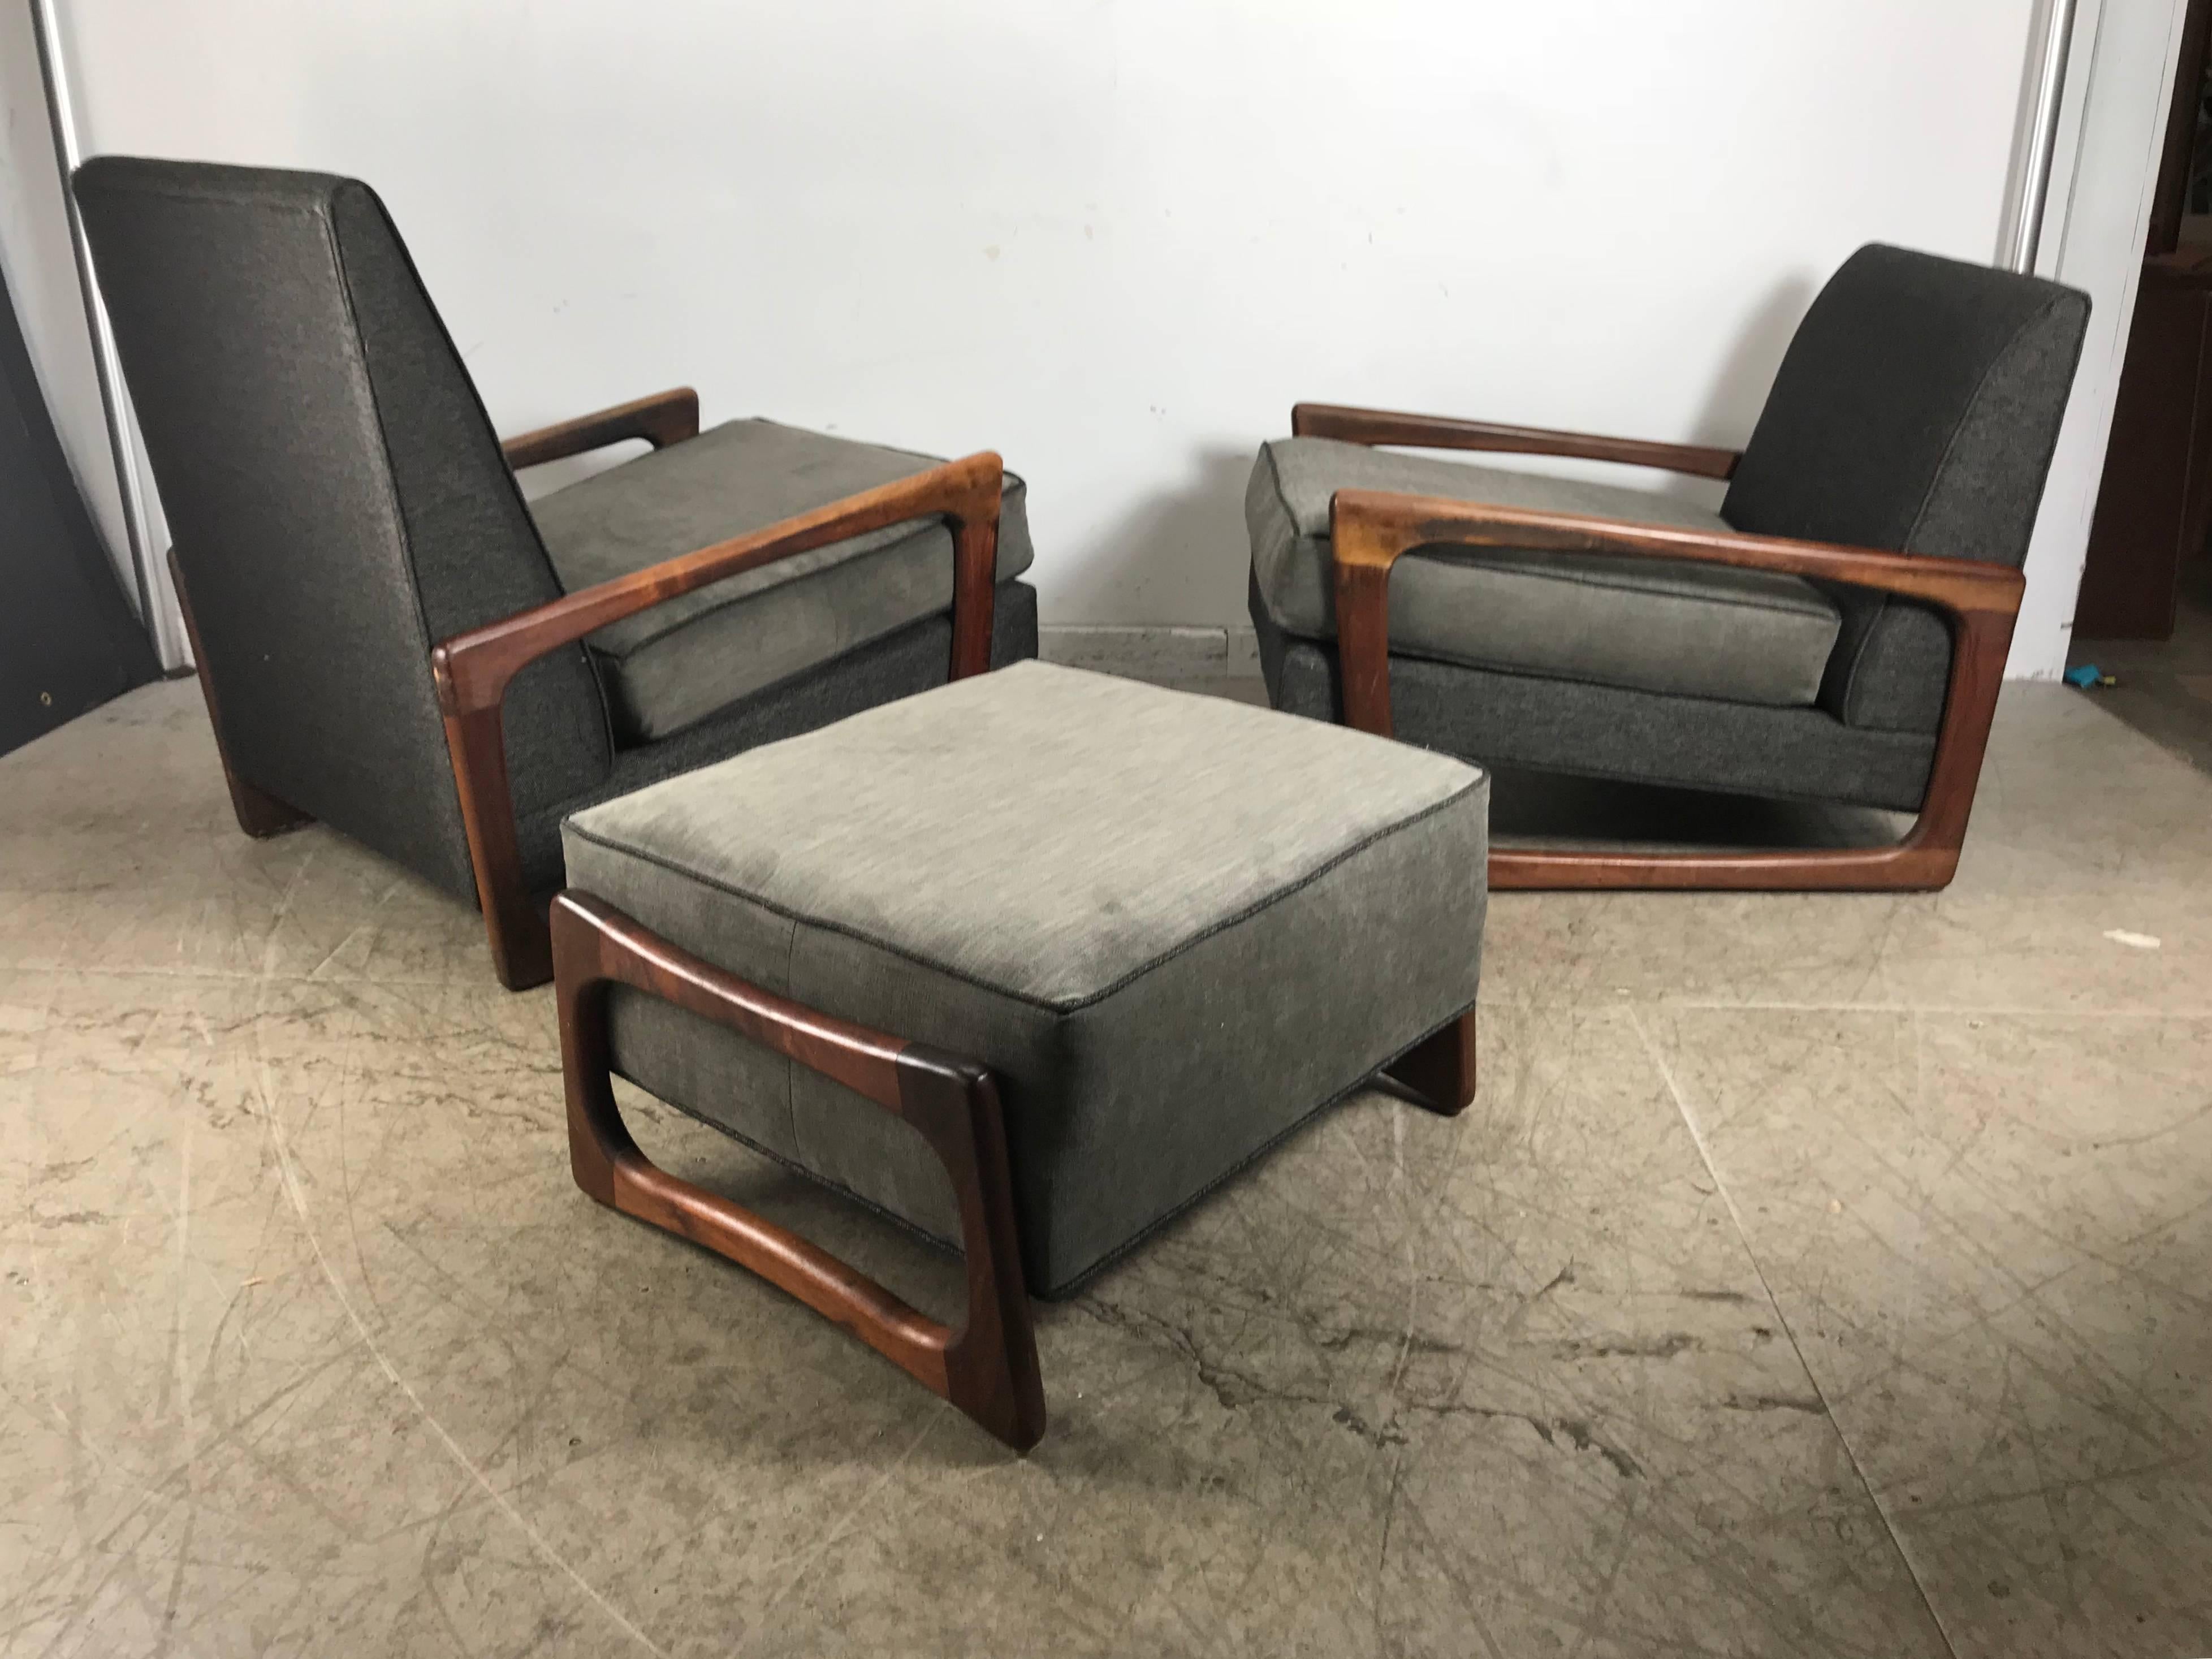 Fabric Stunning Classic Modernist Sculptural Lounge Chairs and Ottoman Adrian Pearsall